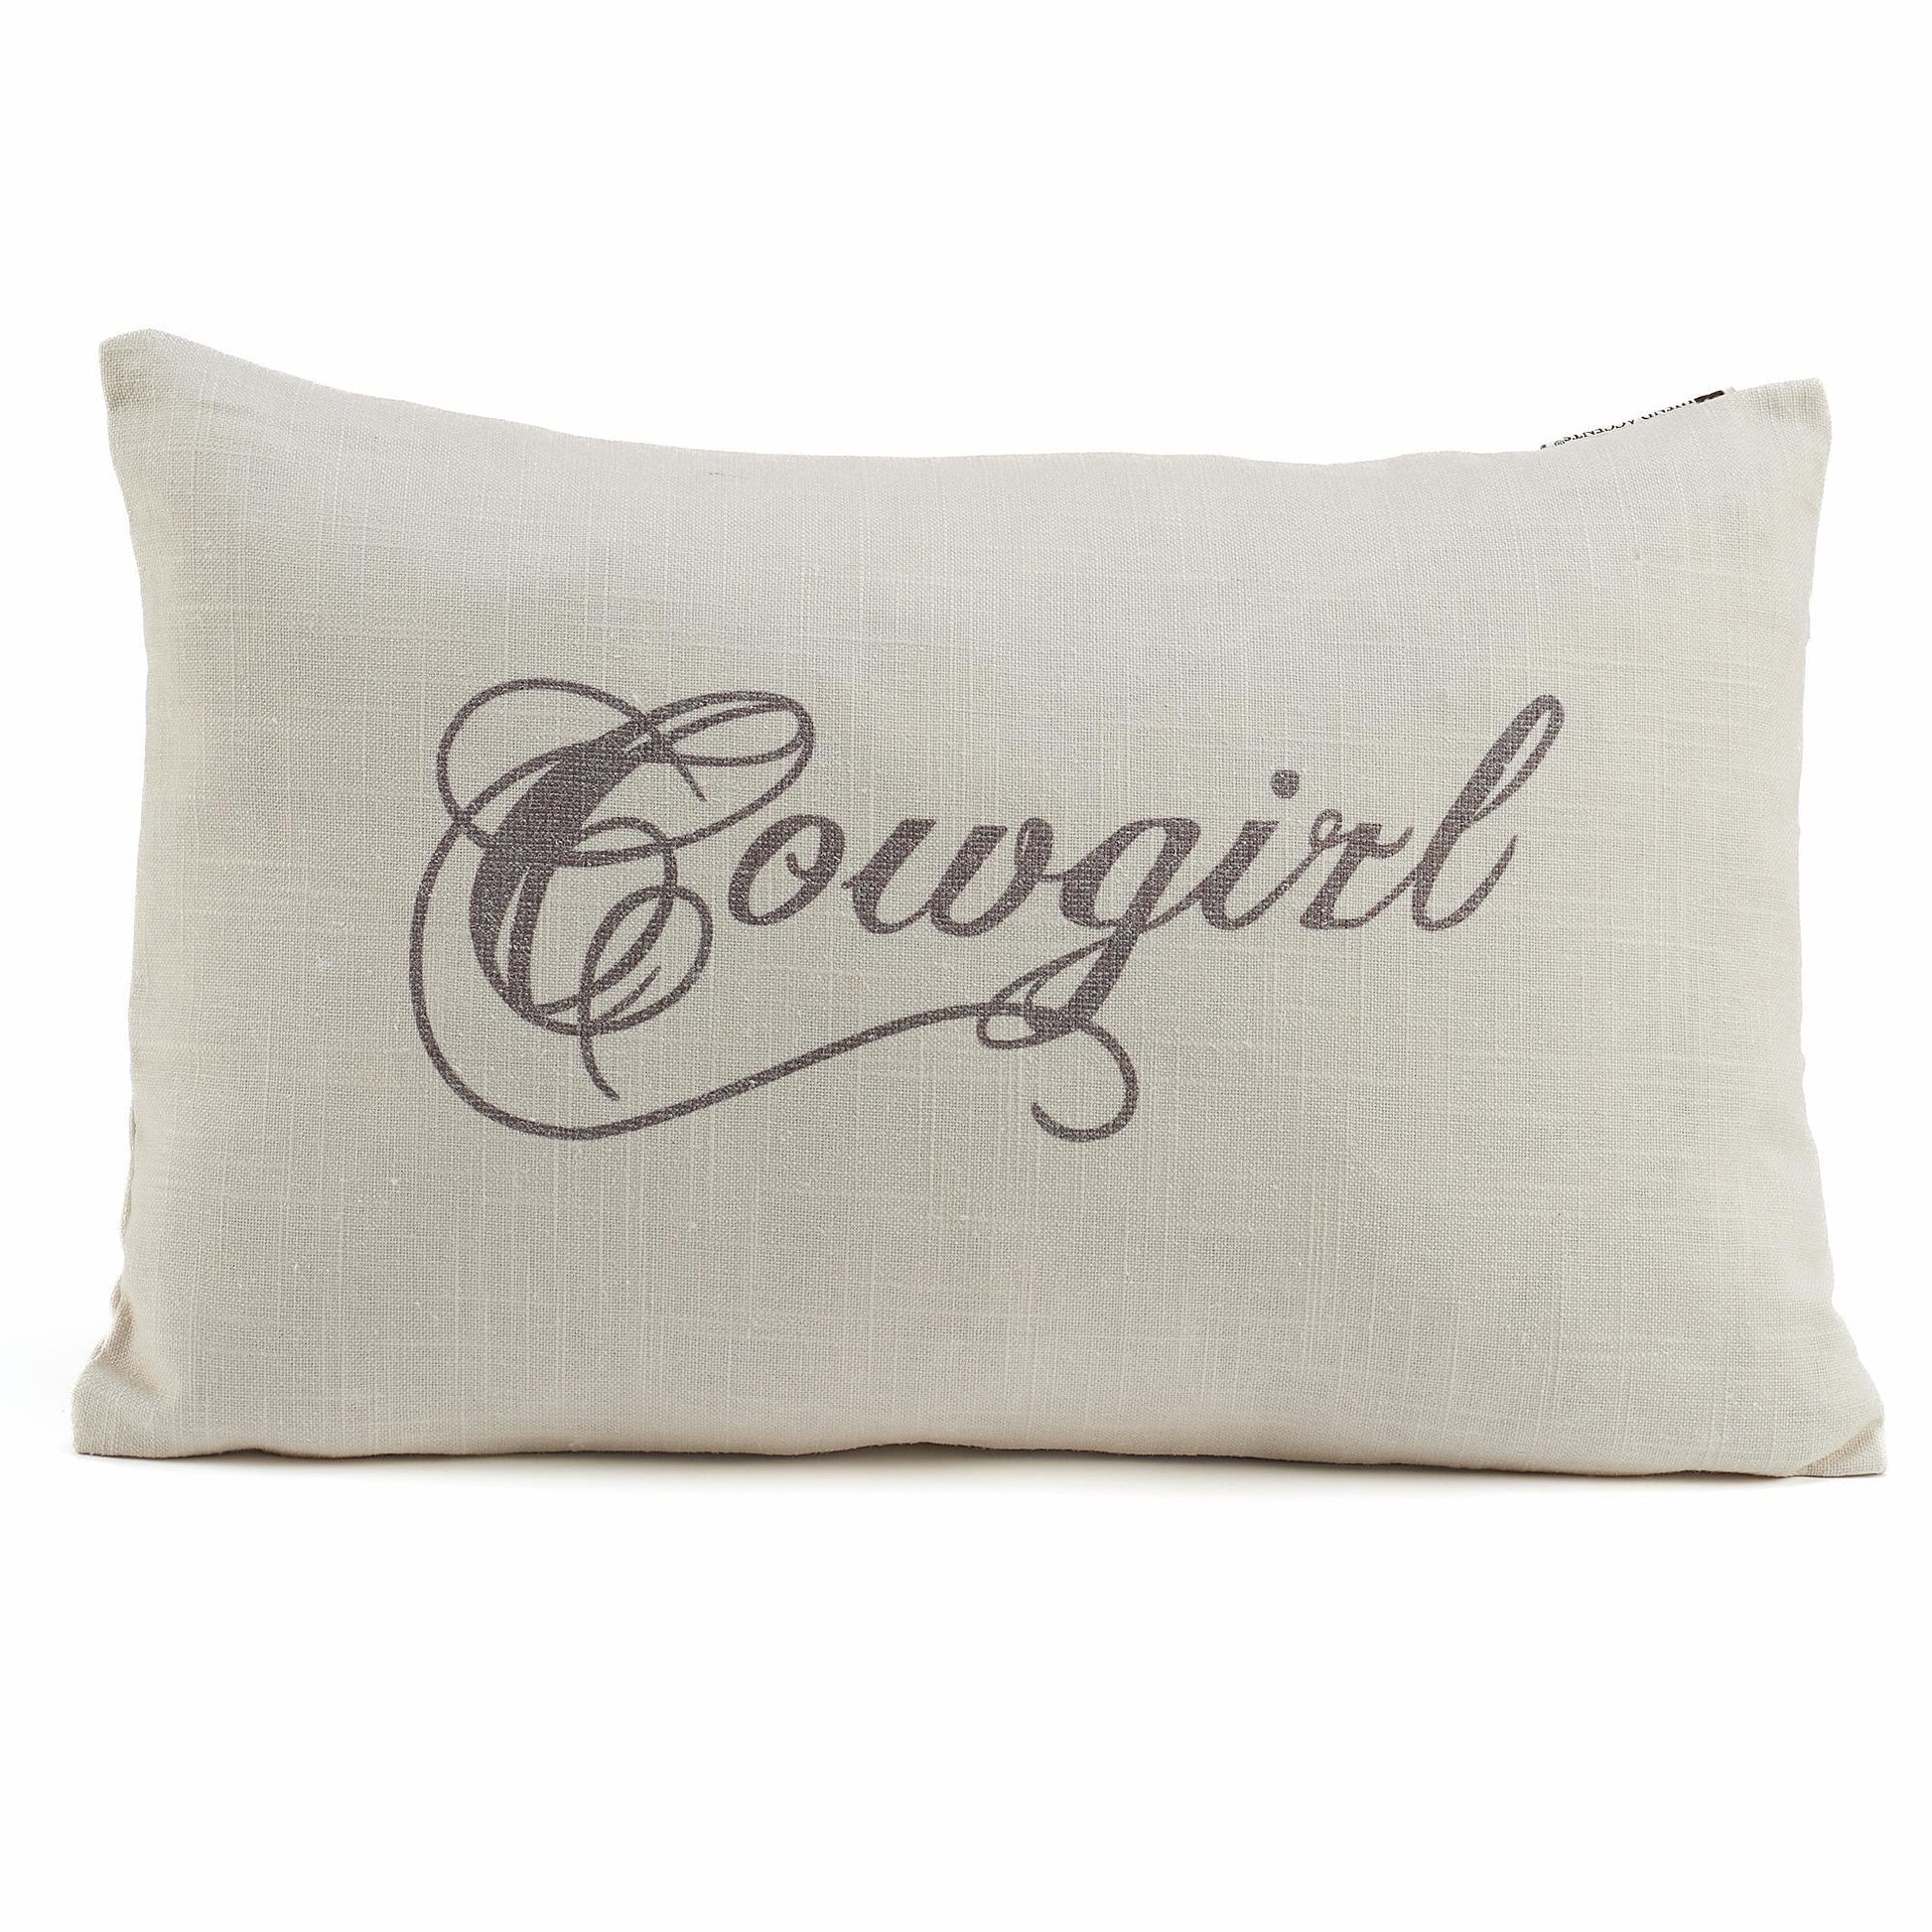 Cowgirl Pillow - Wild Wings